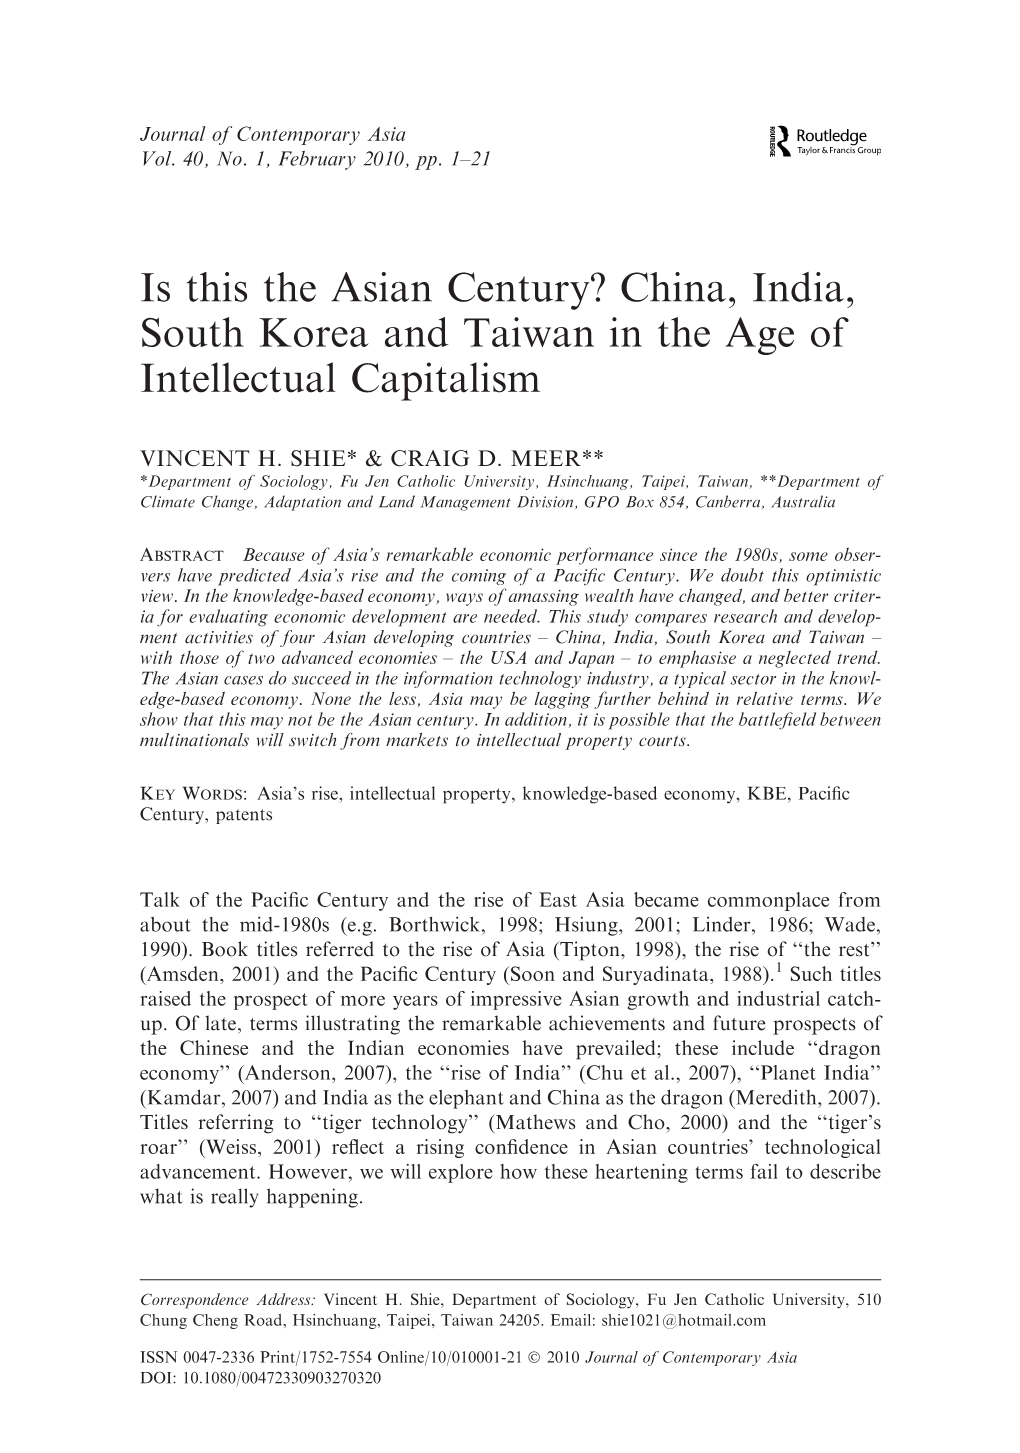 Is This the Asian Century? China, India, South Korea and Taiwan in the Age of Intellectual Capitalism